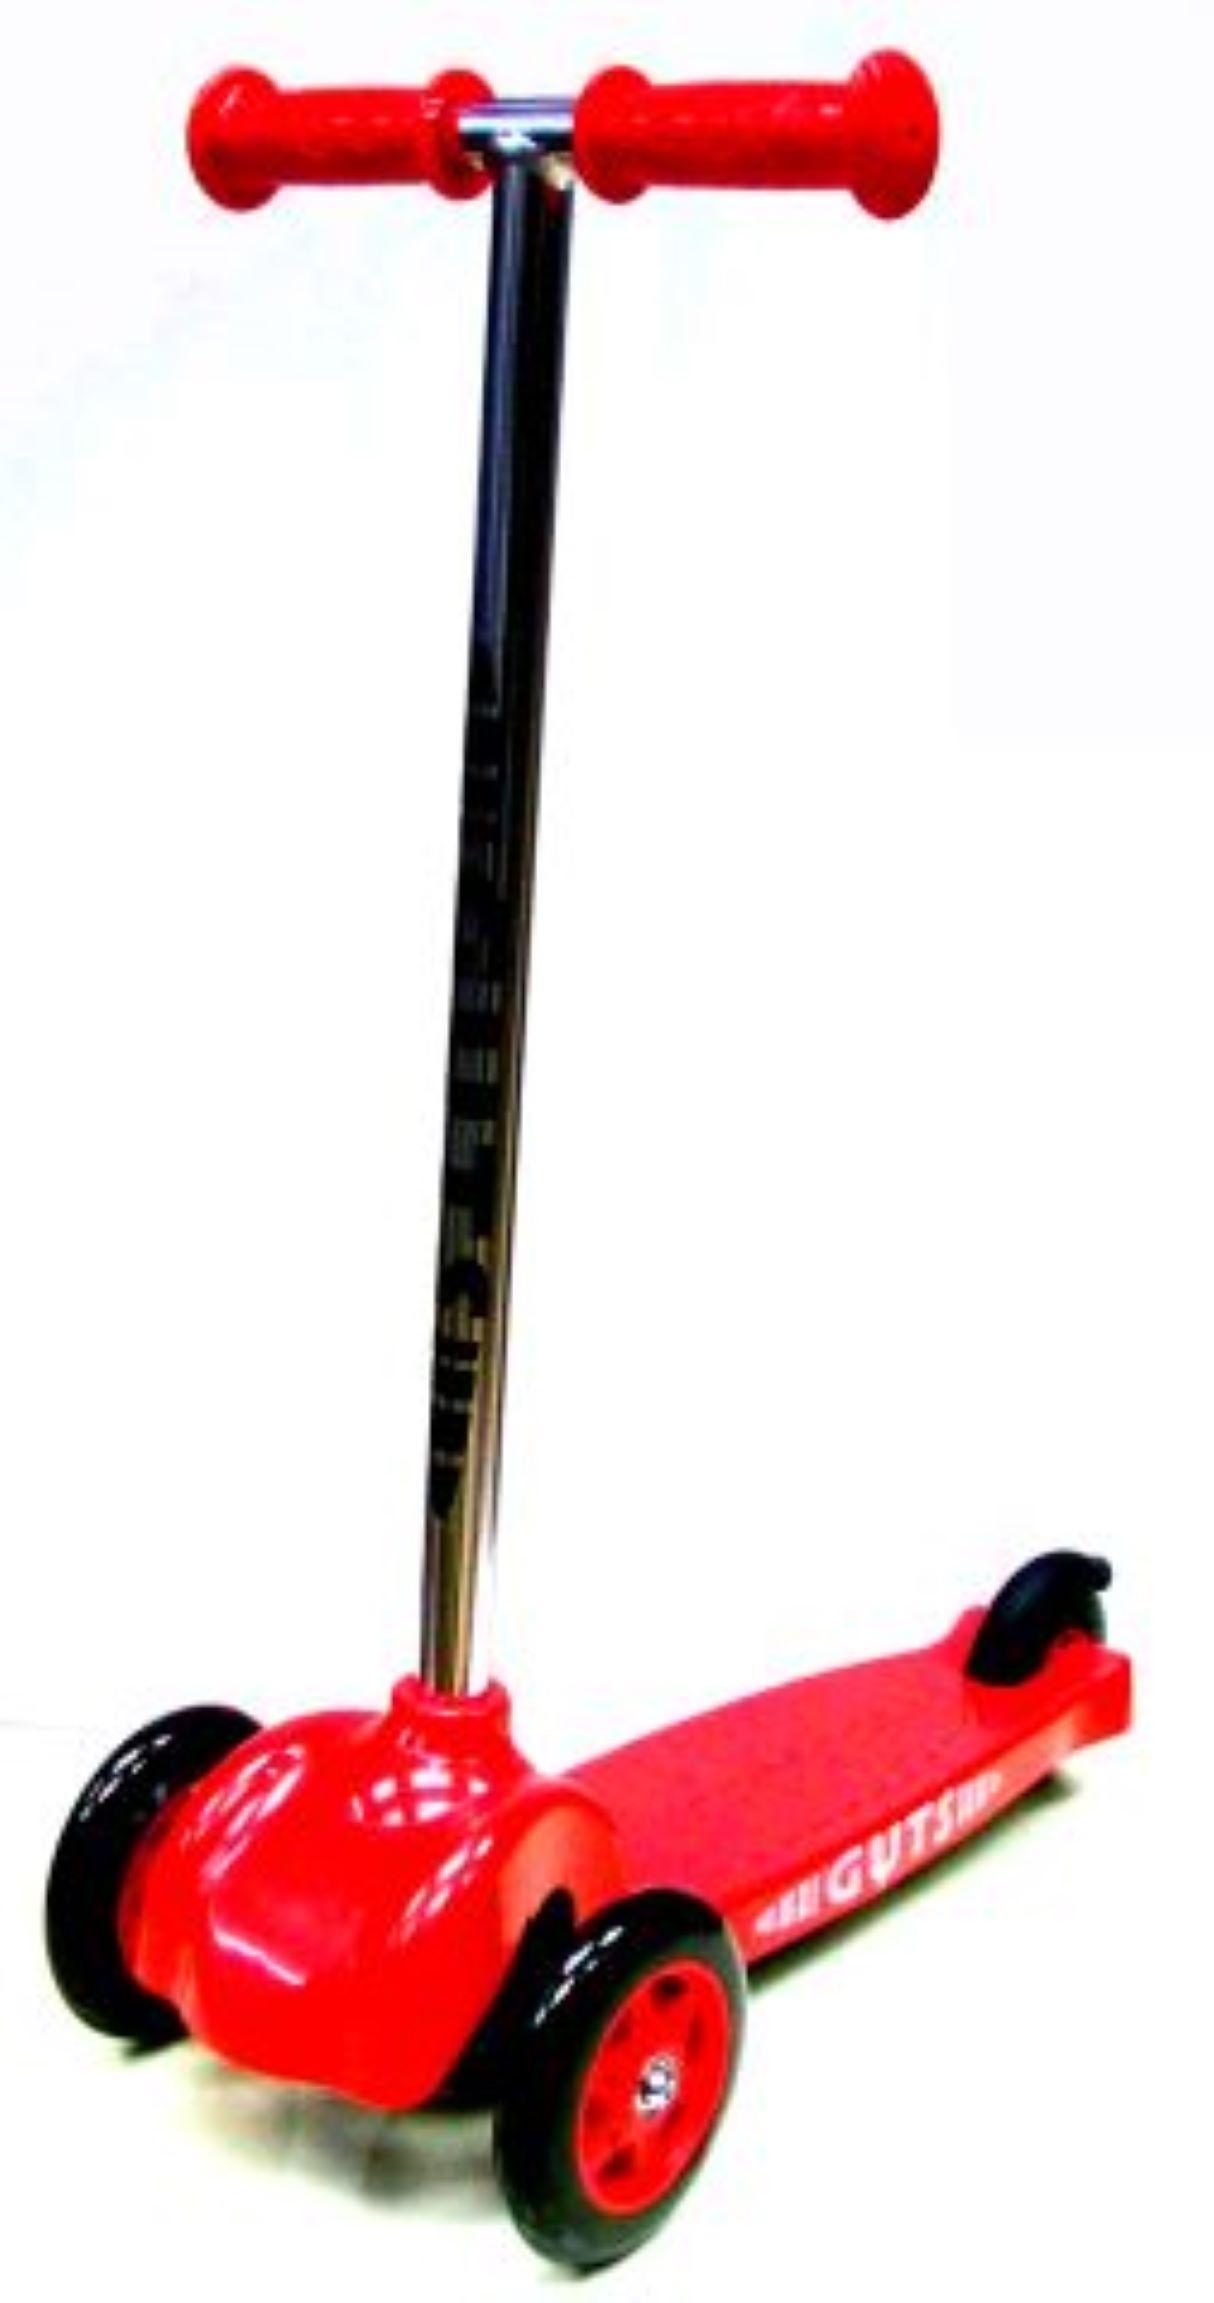 TRAIL TWISTER JUNIOR 3 WHEEL SCOOTER - BLACK RED